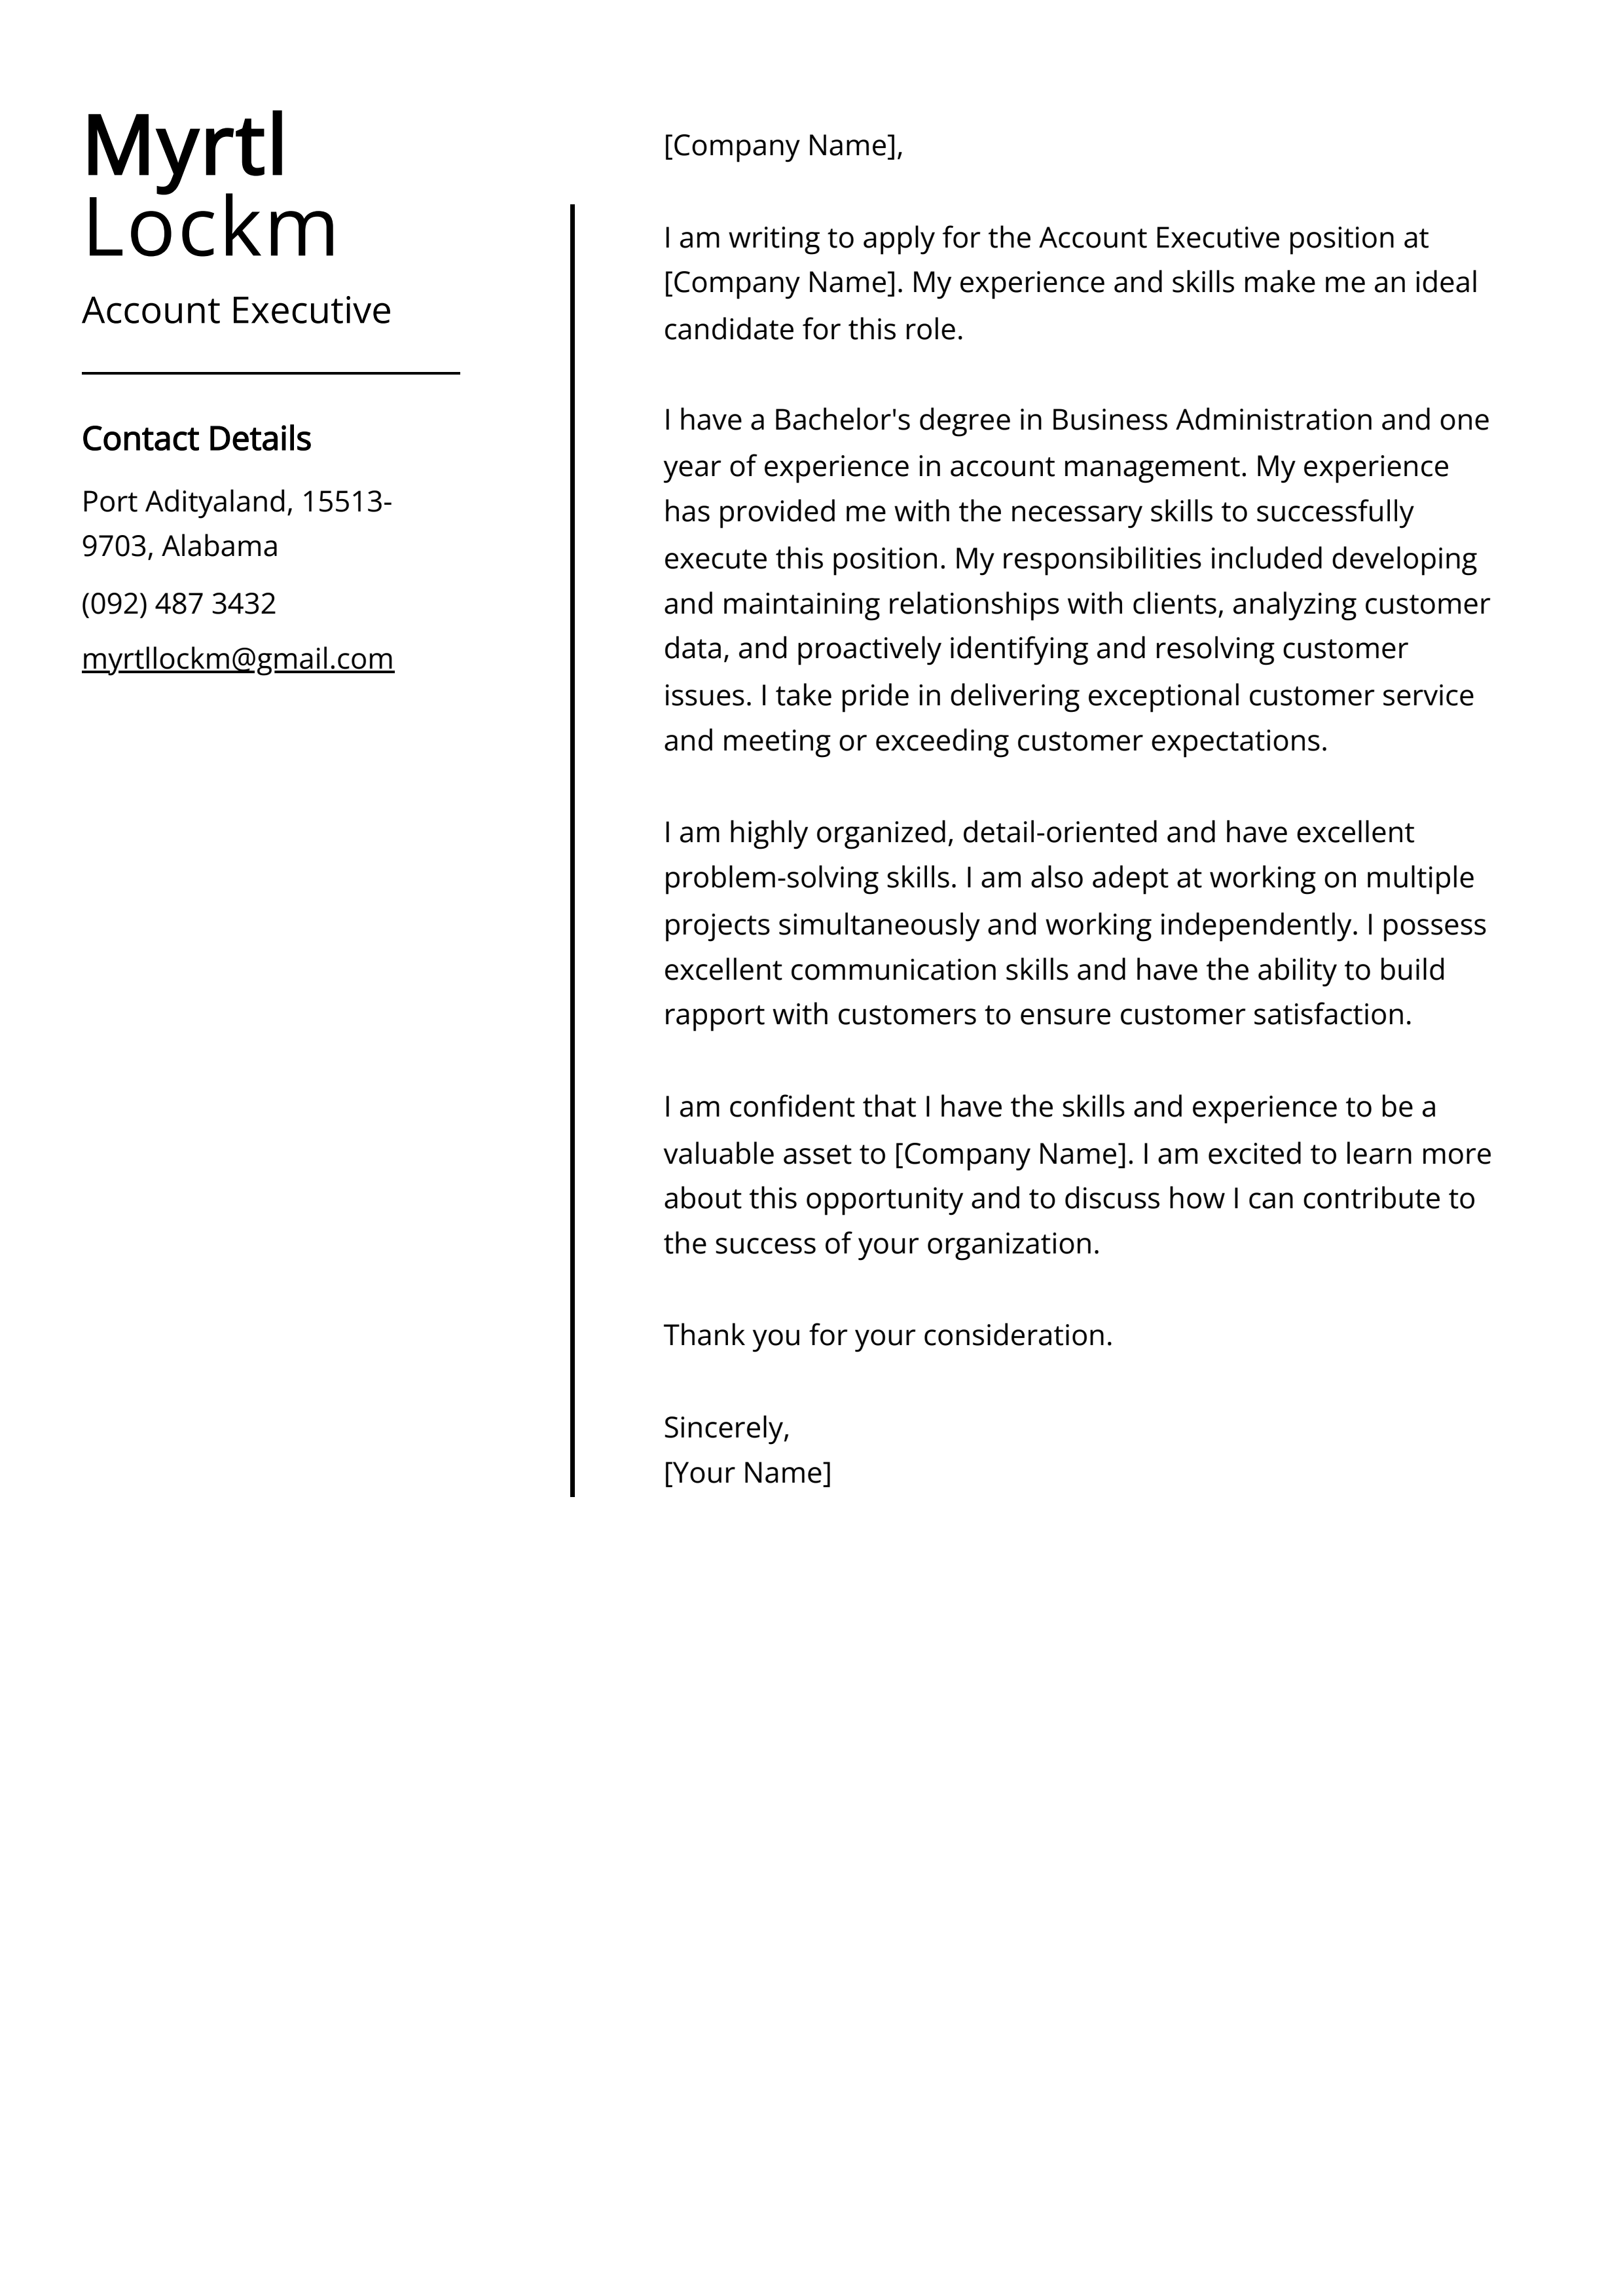 Account Executive Cover Letter Example